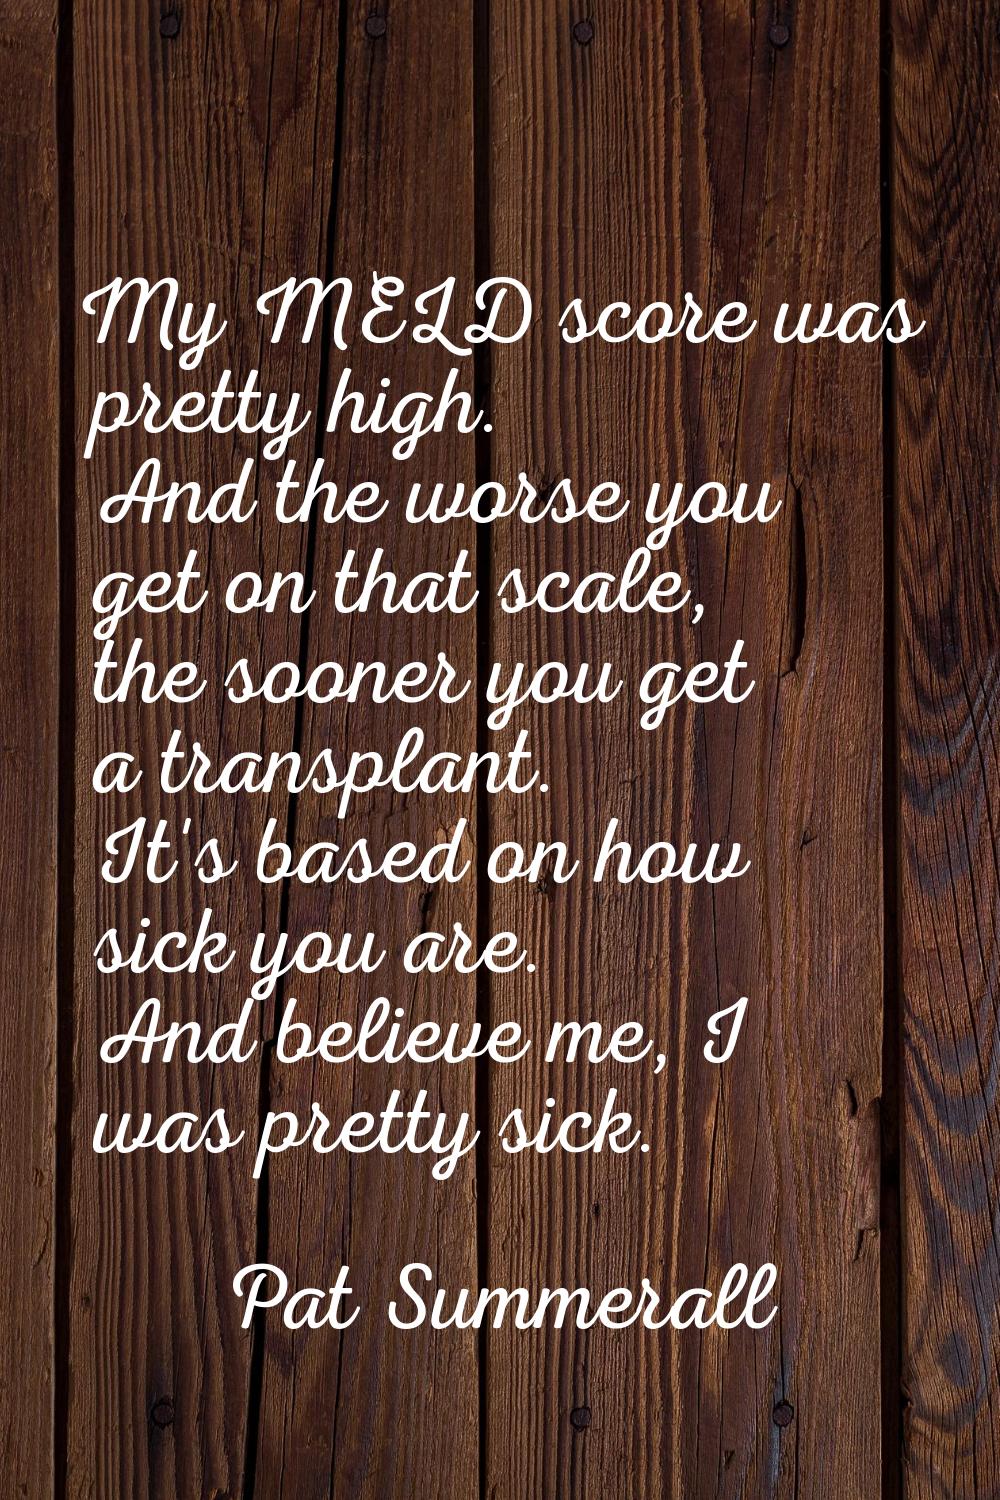 My MELD score was pretty high. And the worse you get on that scale, the sooner you get a transplant